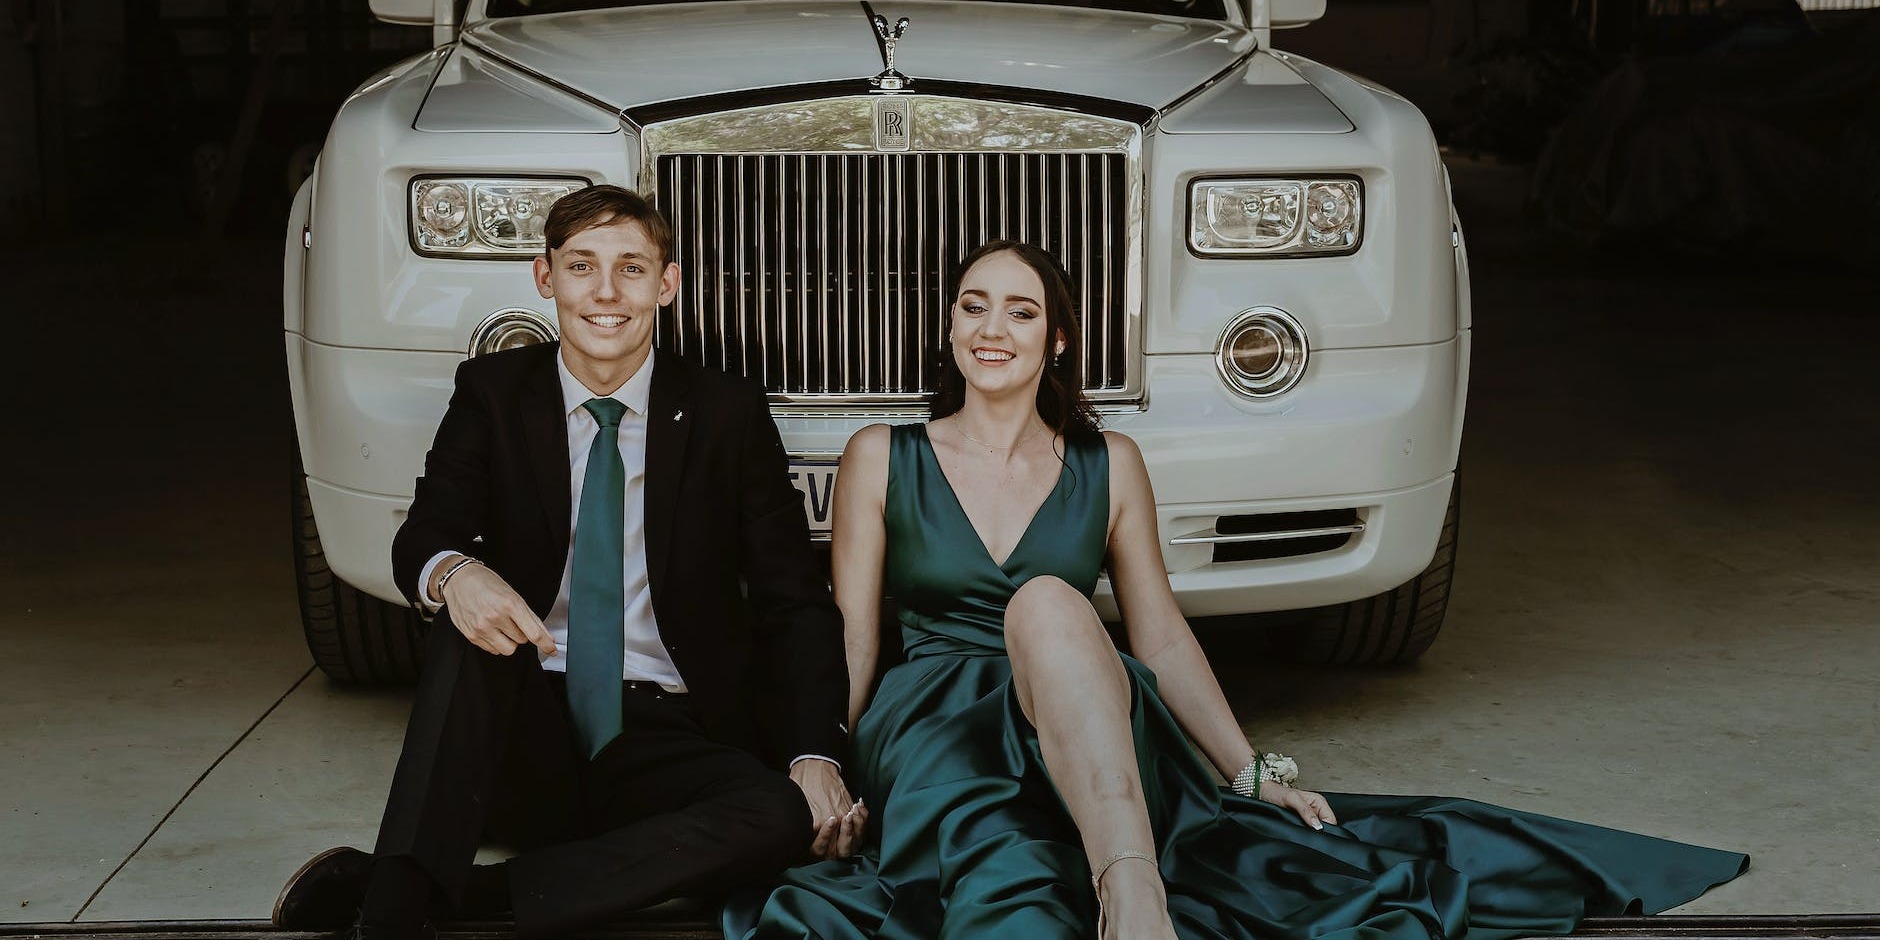 Arrive in Style: Finding the Best Prom Transportation Deals in Reading